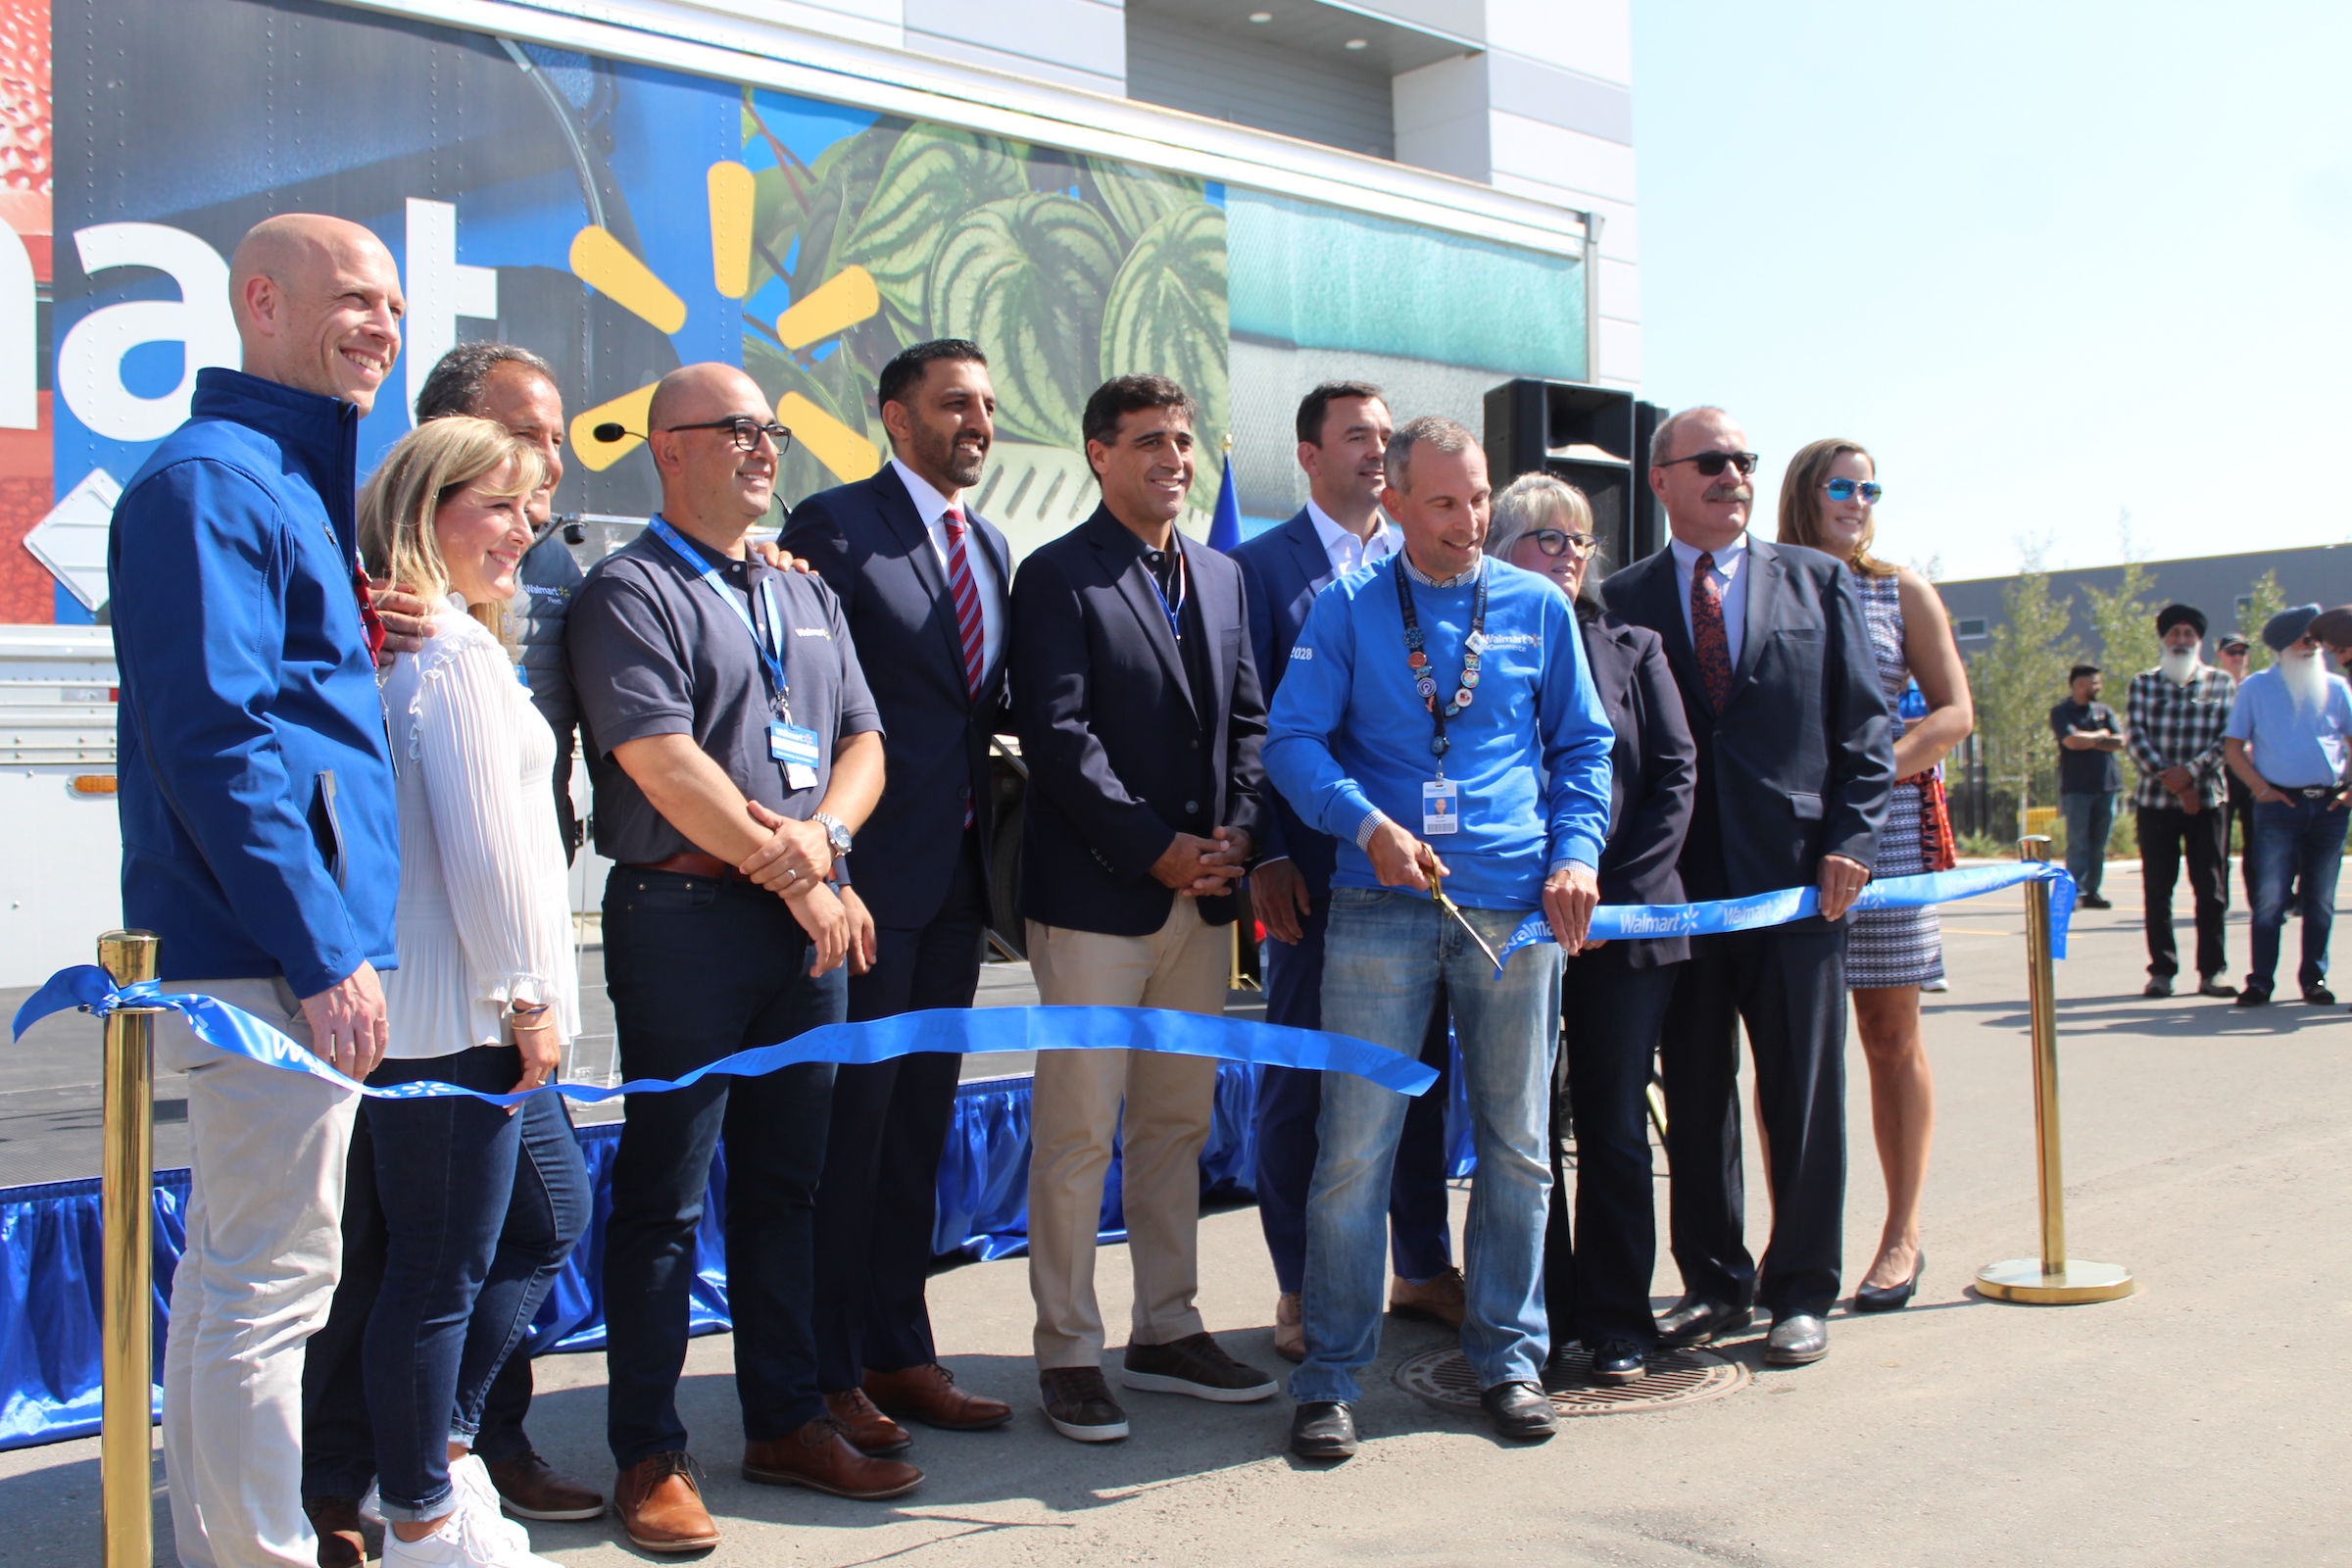 Walmart Canada opens first high-tech fulfillment centre in Western Canada  in Rocky View County, Alberta